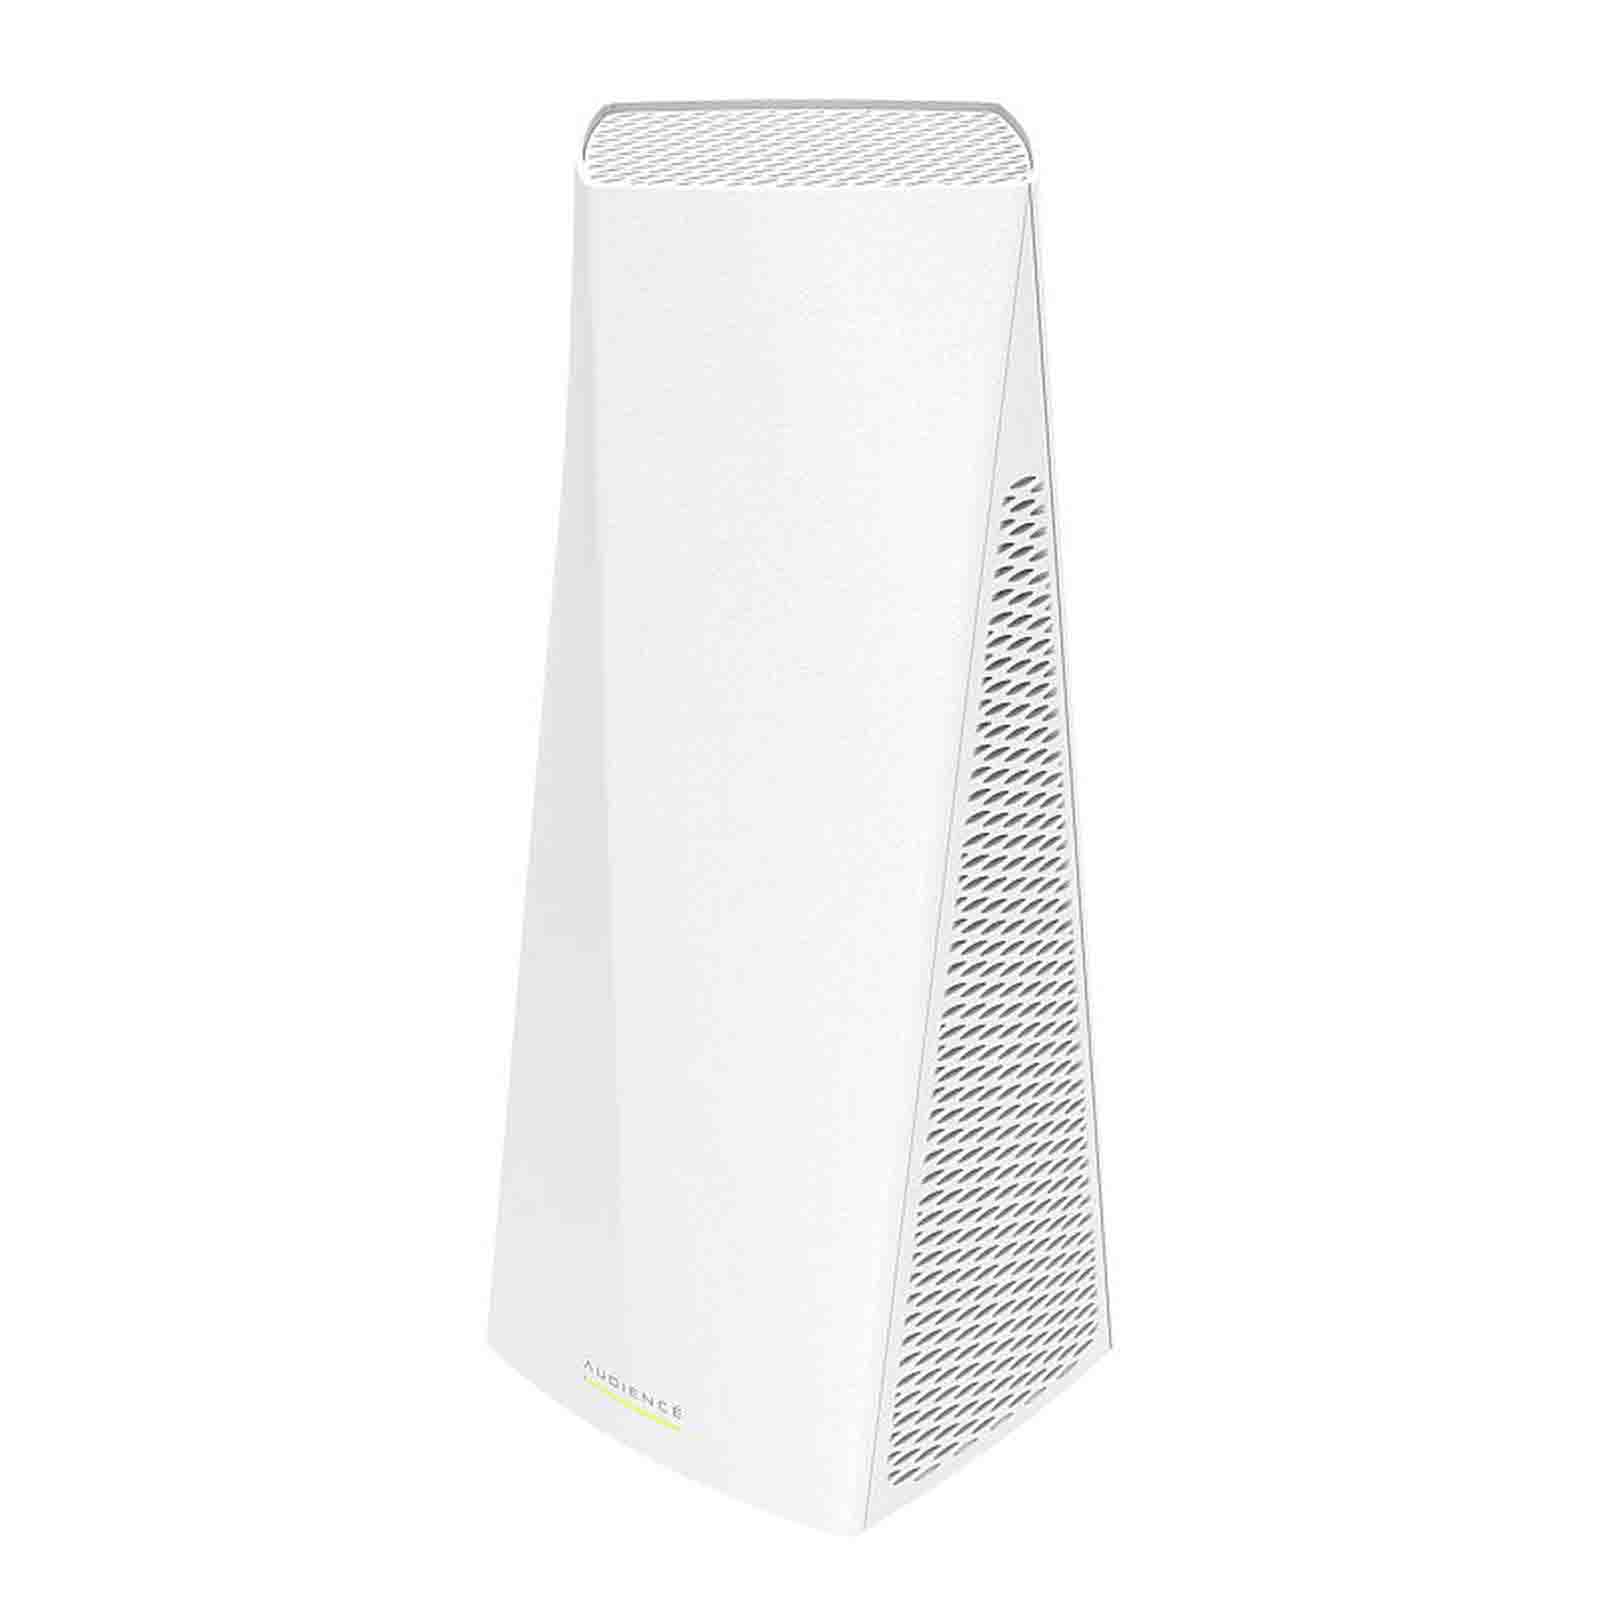 MikroTik Audience WiFi (RBD25G-5HPacQD2HPnD)